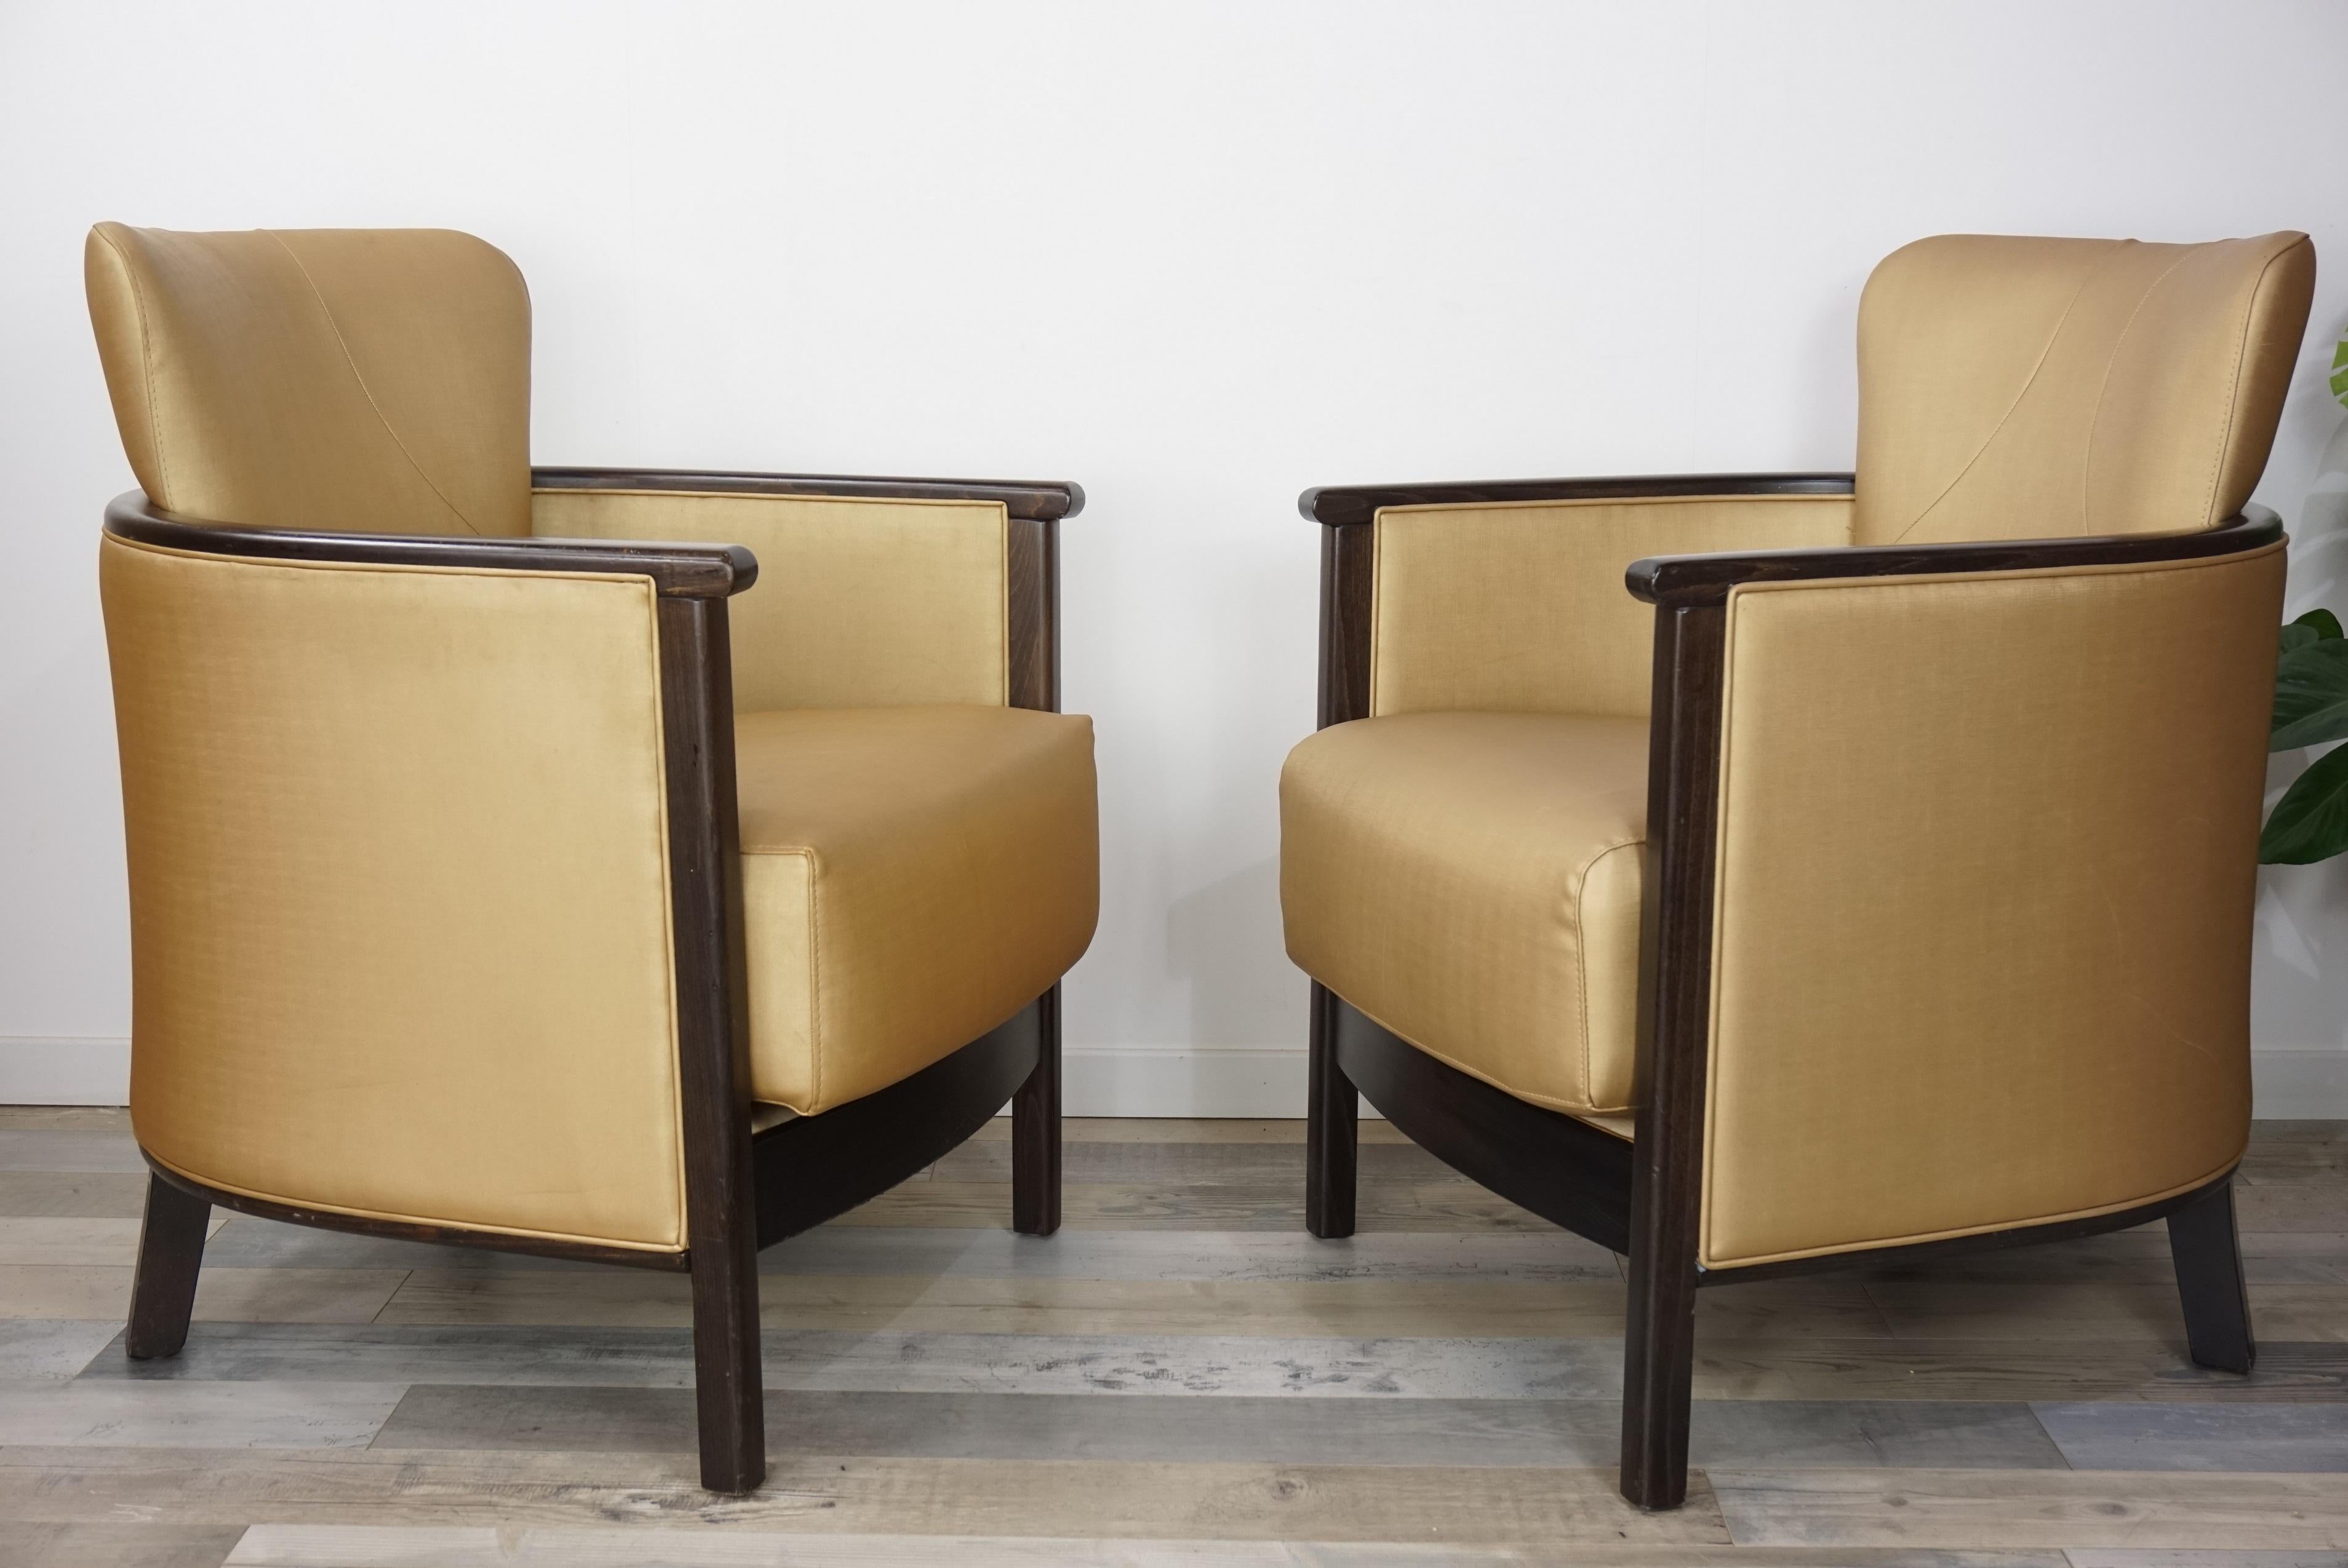 This superb pair of armchairs will surely be one of the centrepieces of your interior.
Its look unmistakably reminds the Art Deco years! In short, it is like you, timeless ...
Very original and in perfect condition, armchair from an old French